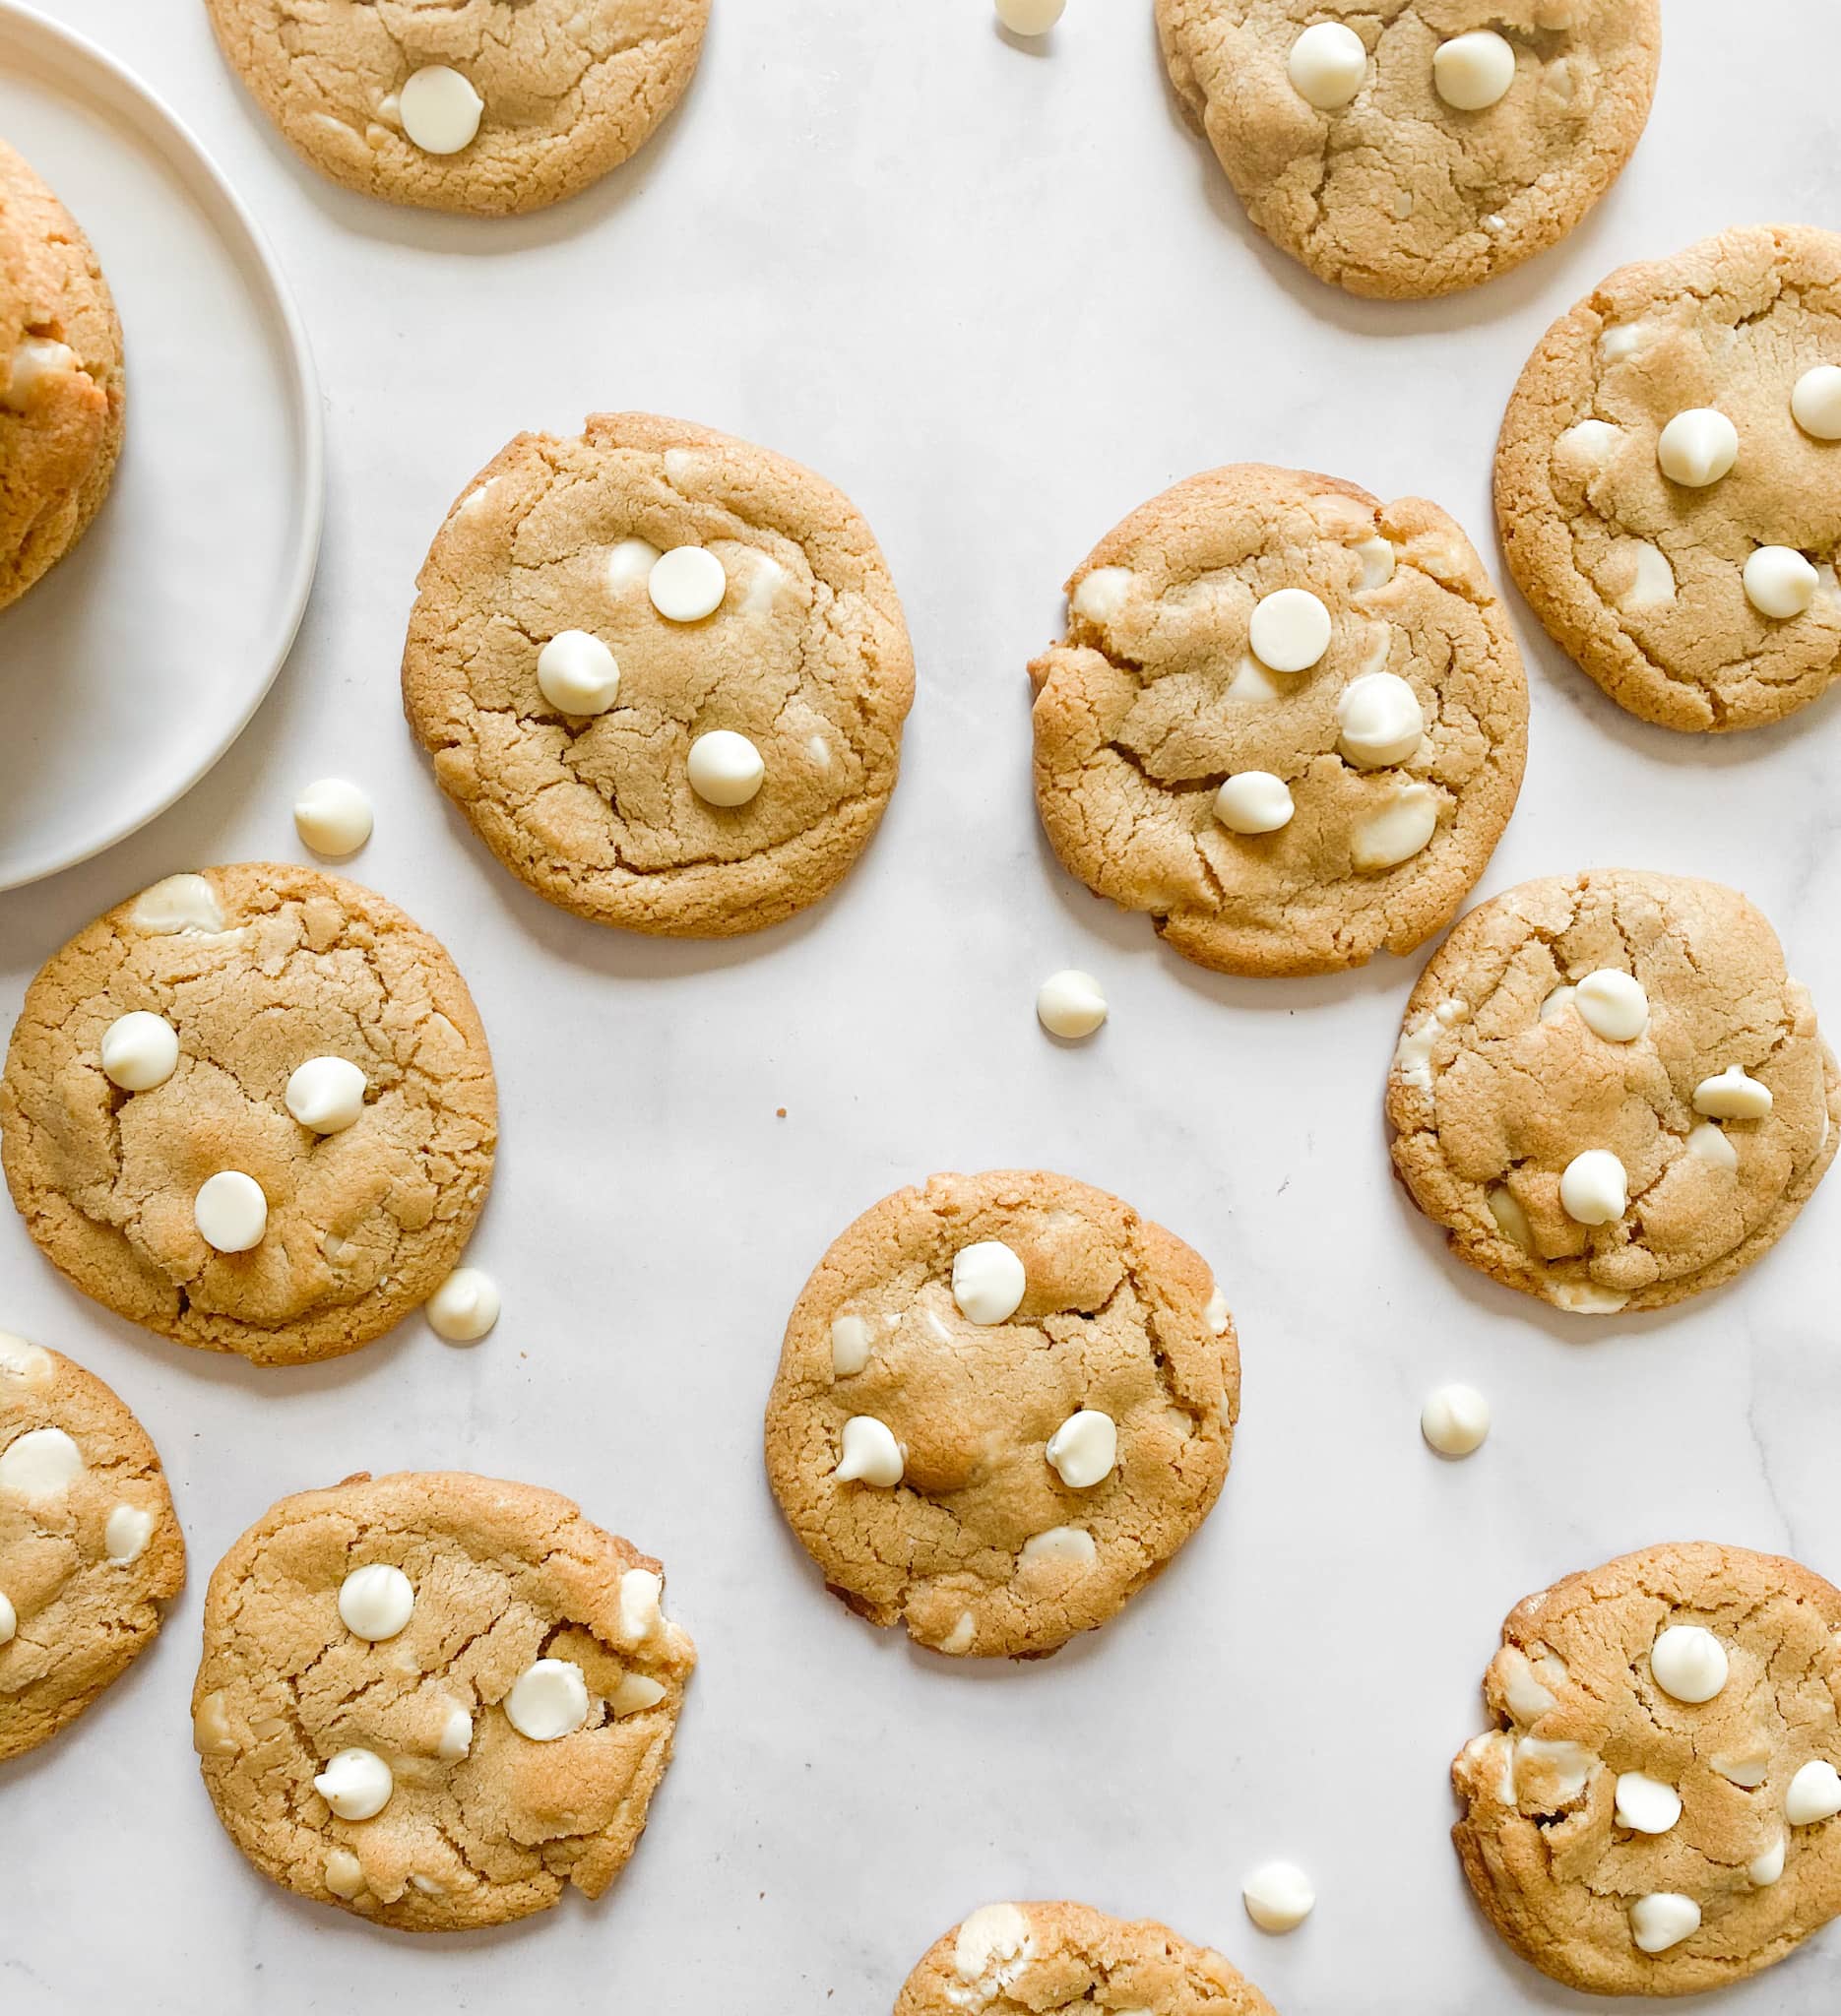 Gluten-free white chocolate chip cookies. Photo was taken from an aerial view of a spread of cookies.